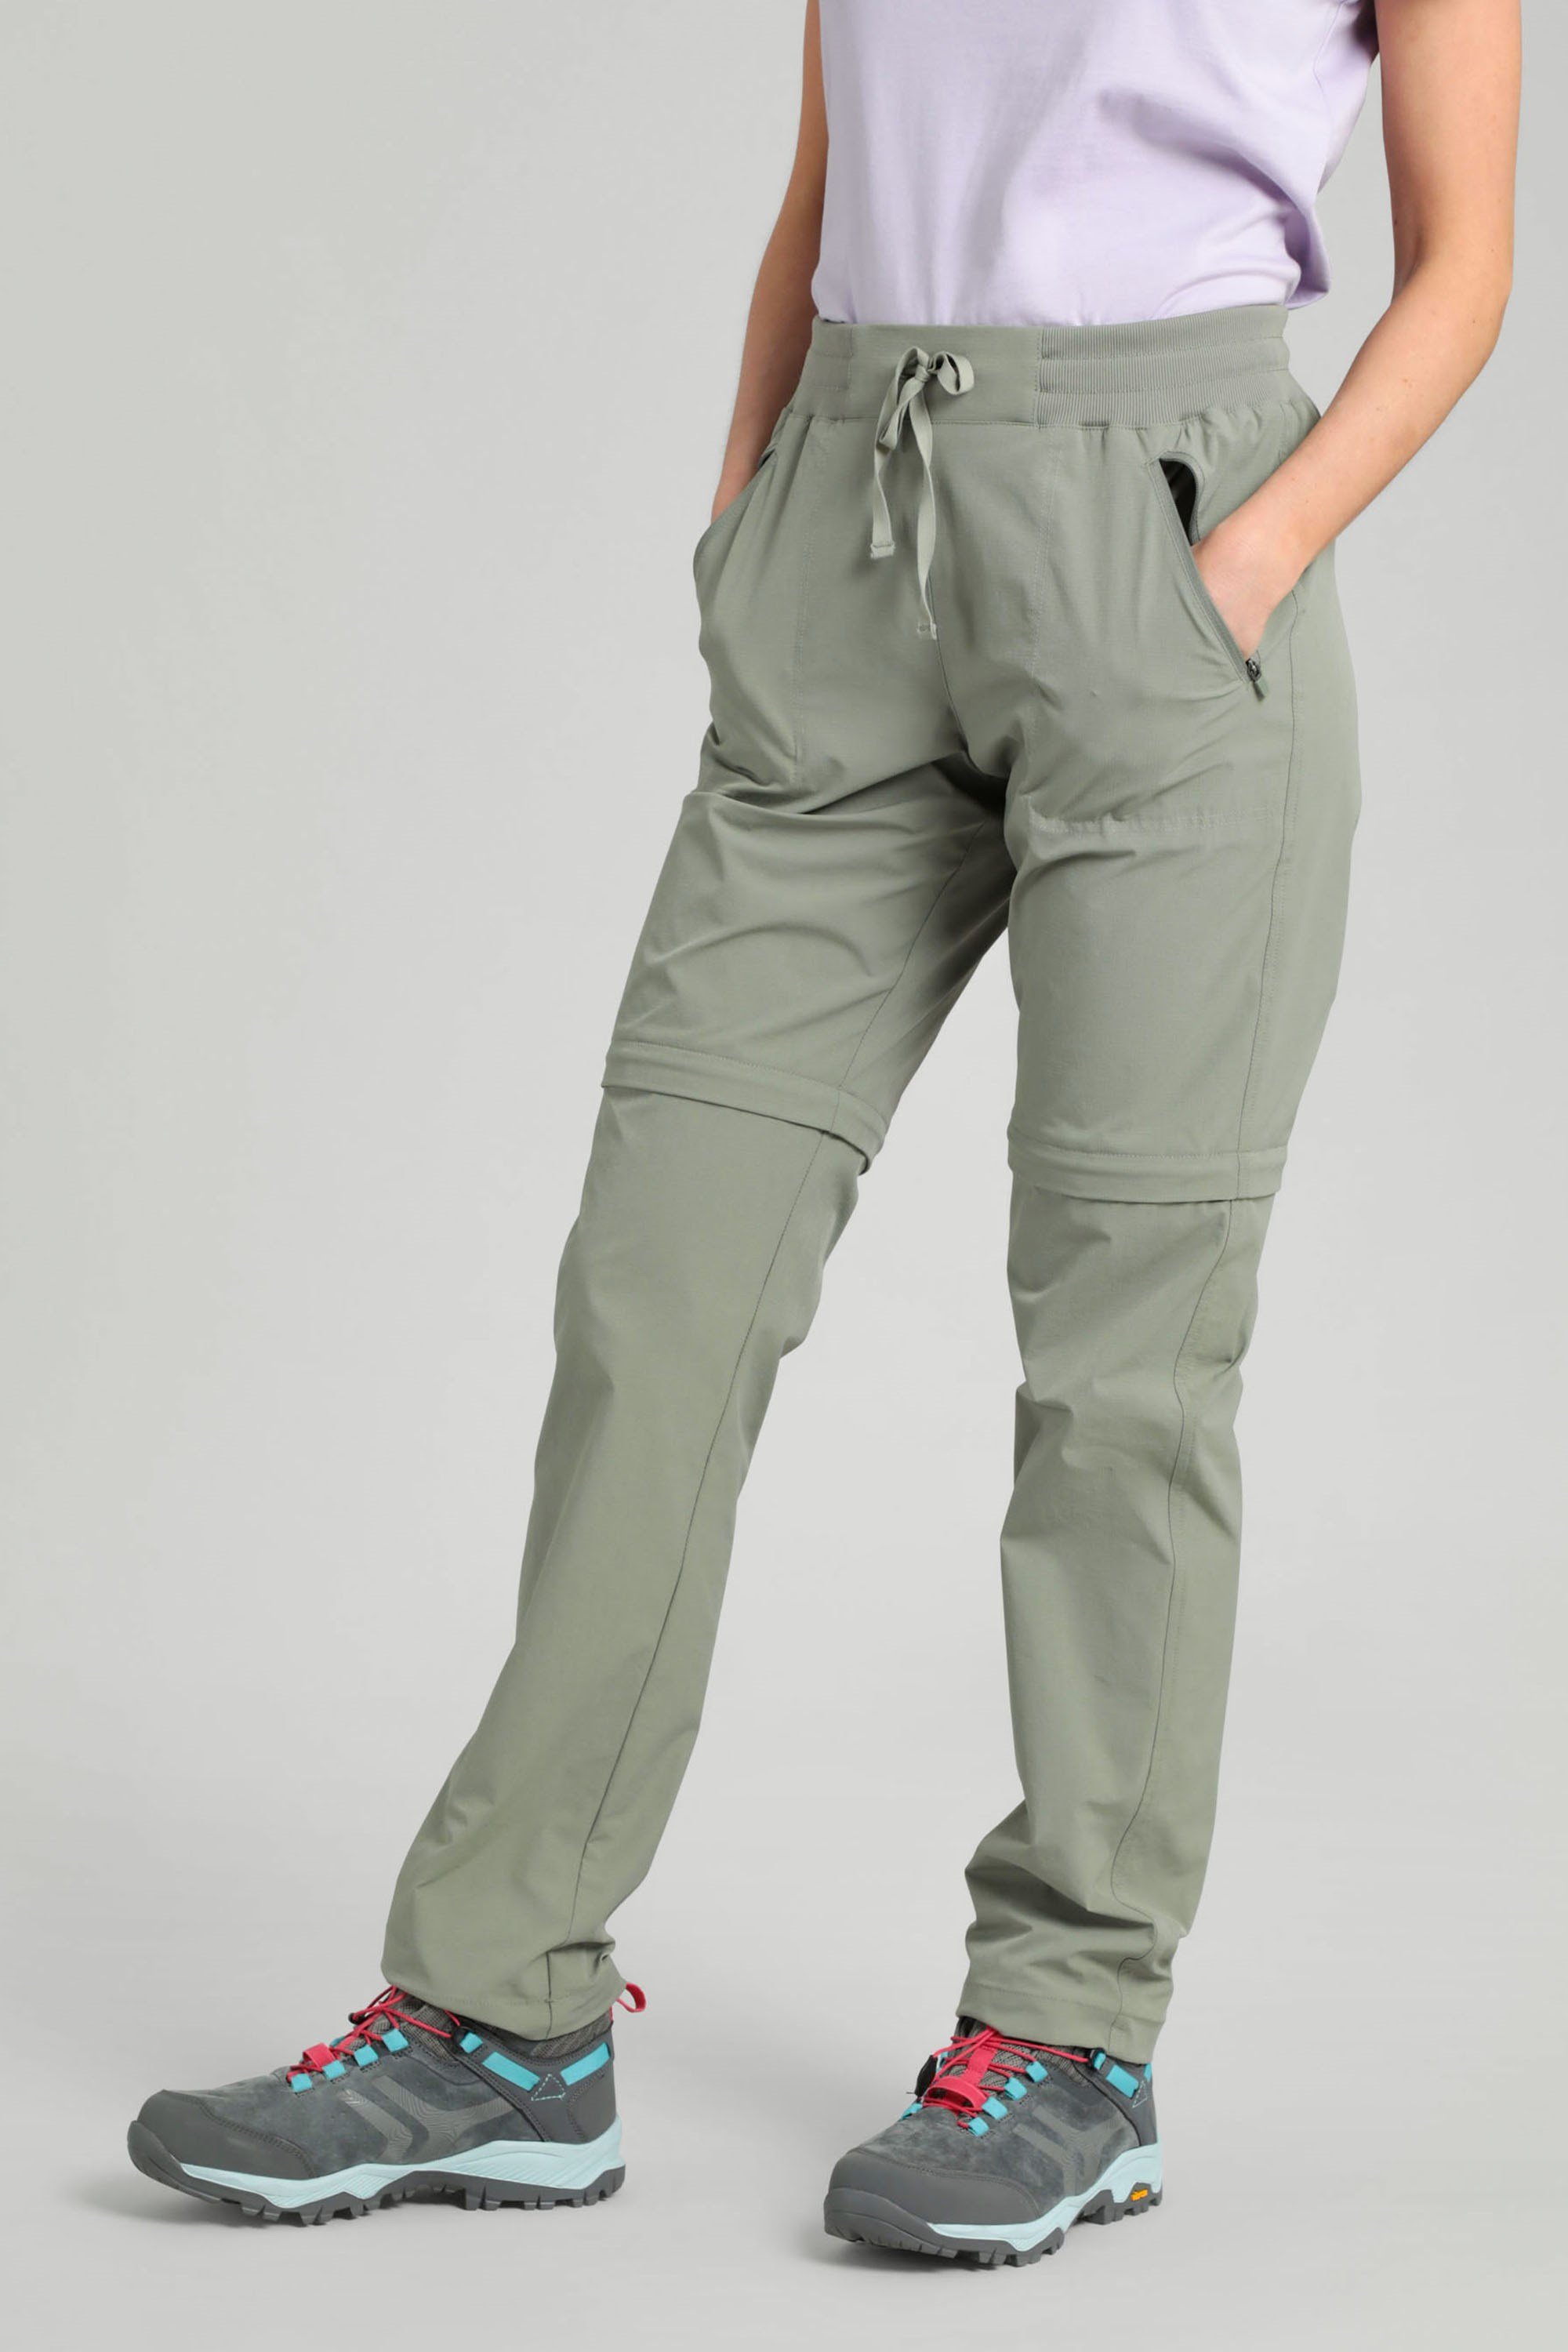 Tommy Jeans zip off hiking trousers in stone | ASOS